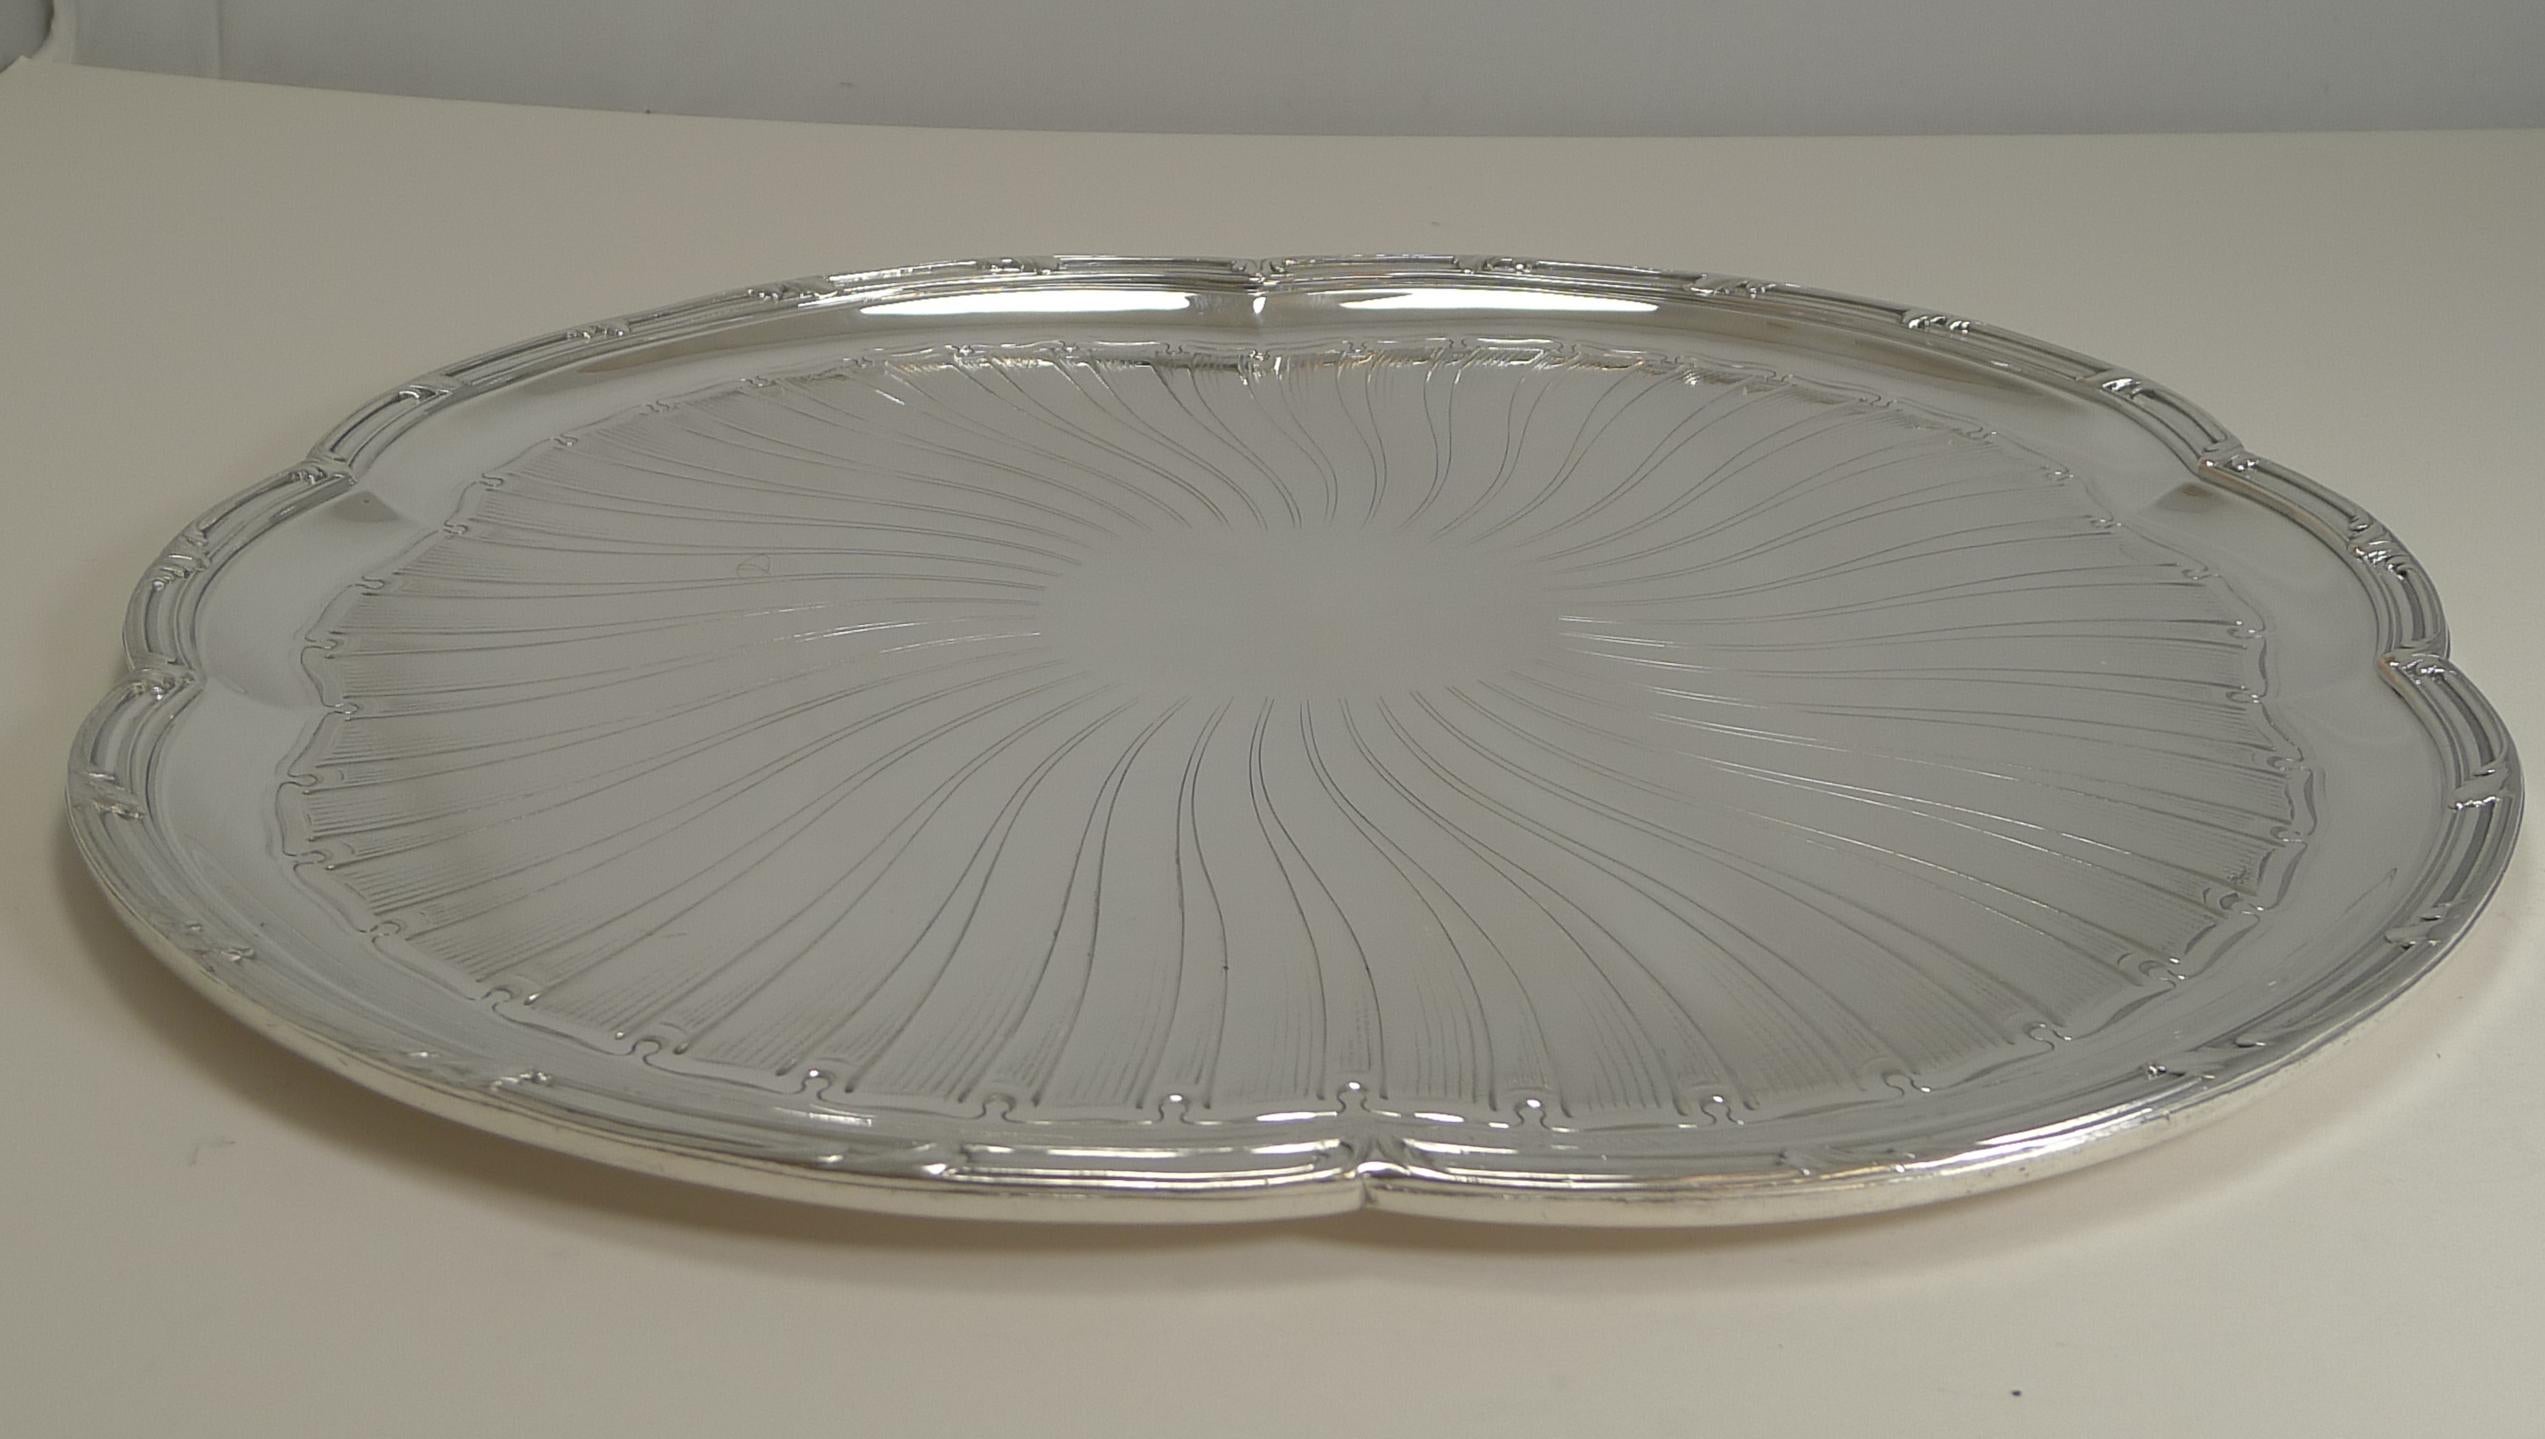 Late 19th Century Antique French Christofle Silver Plated Tray, circa 1896 Art Nouveau